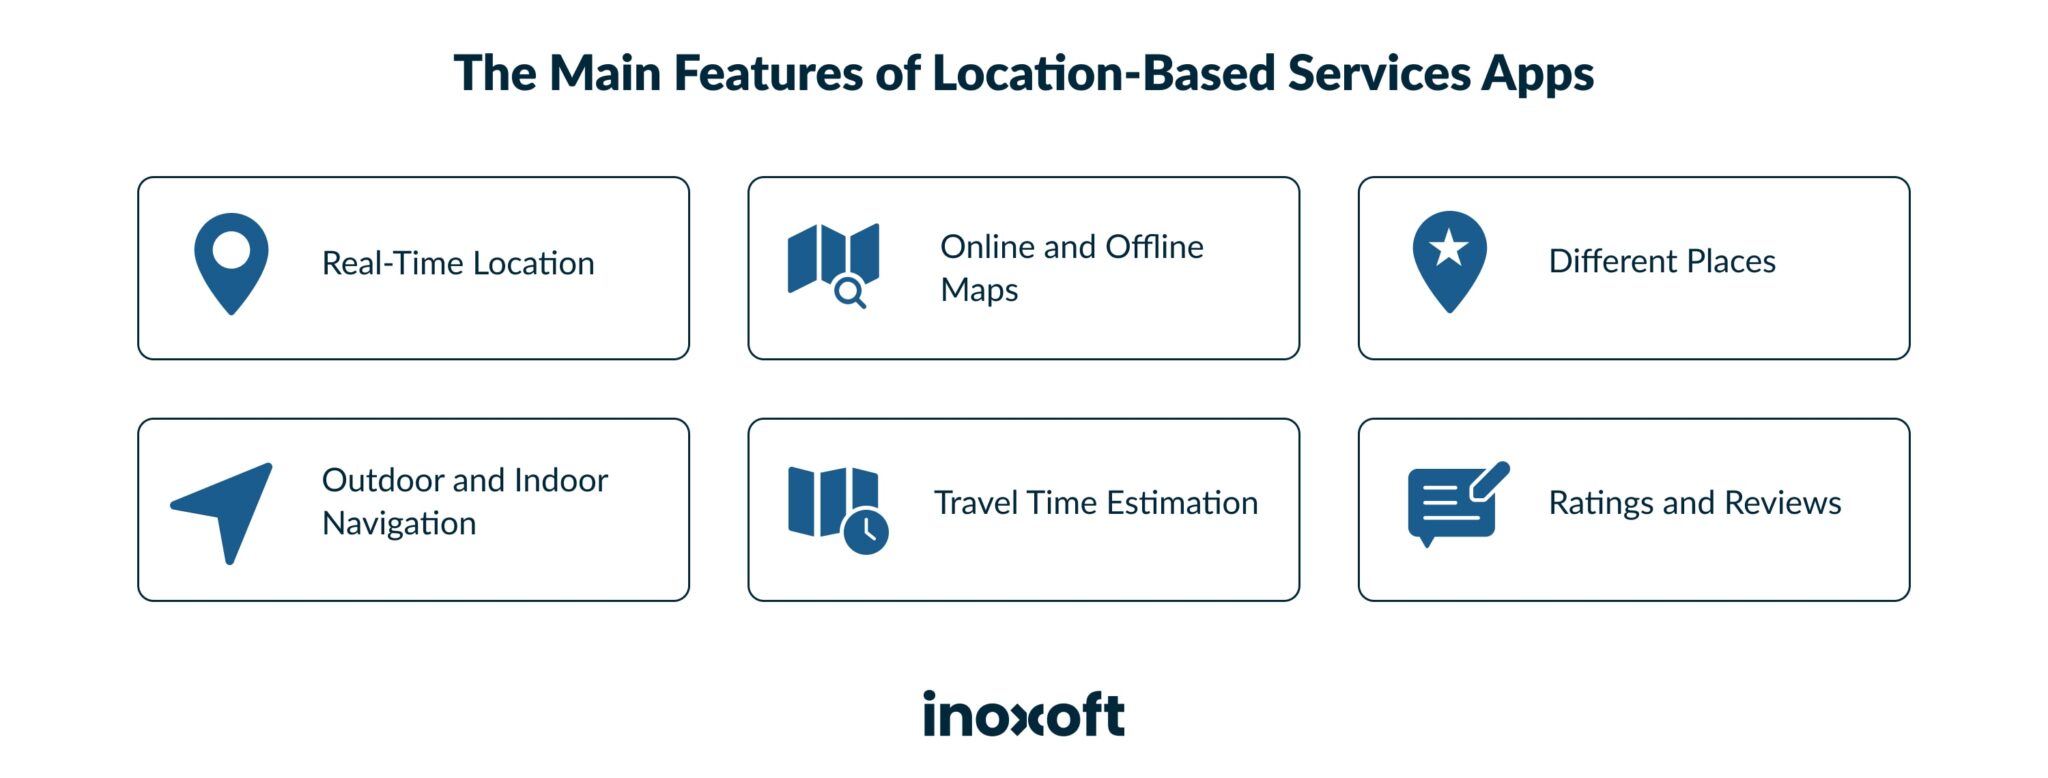 The Main Features of Location-Based Services Apps